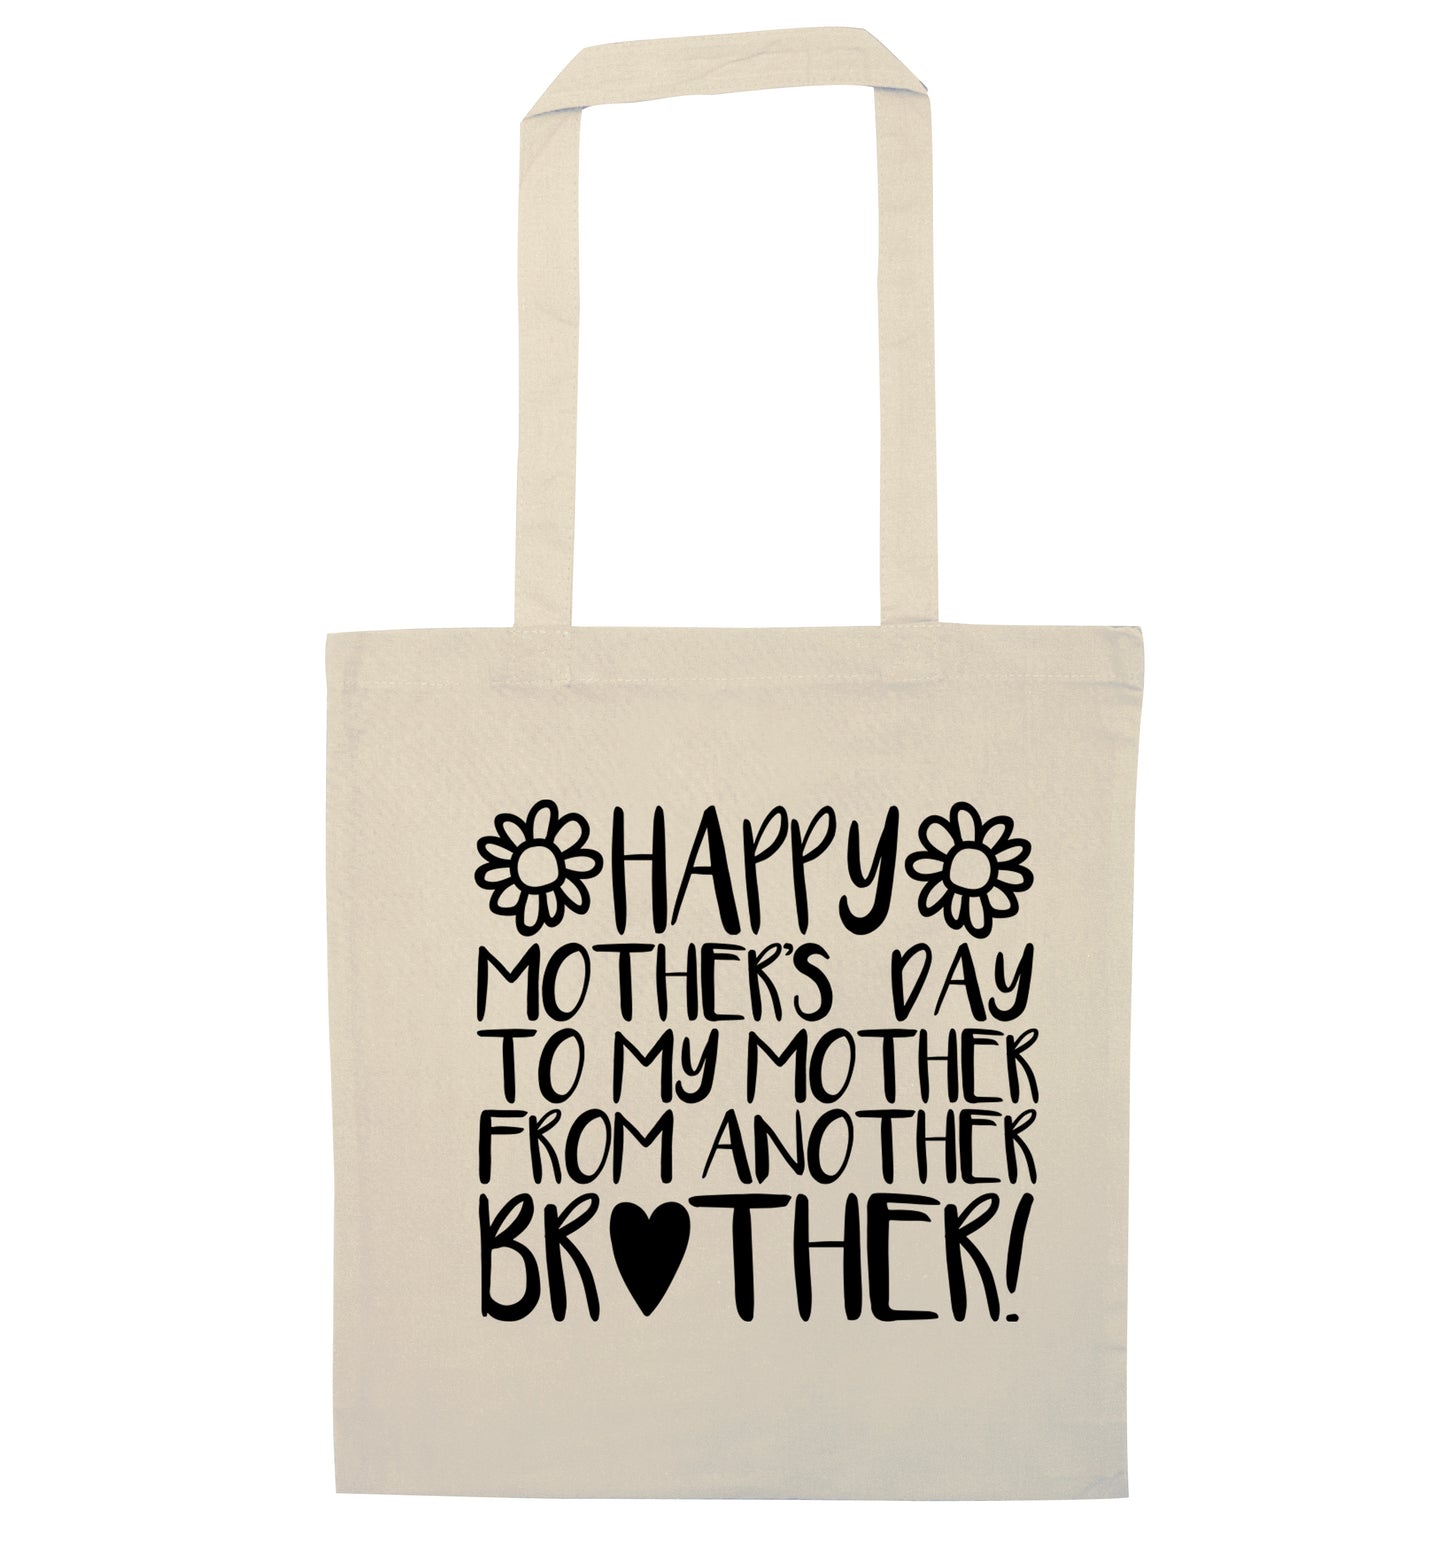 Happy mother's day to my mother from another brother natural tote bag